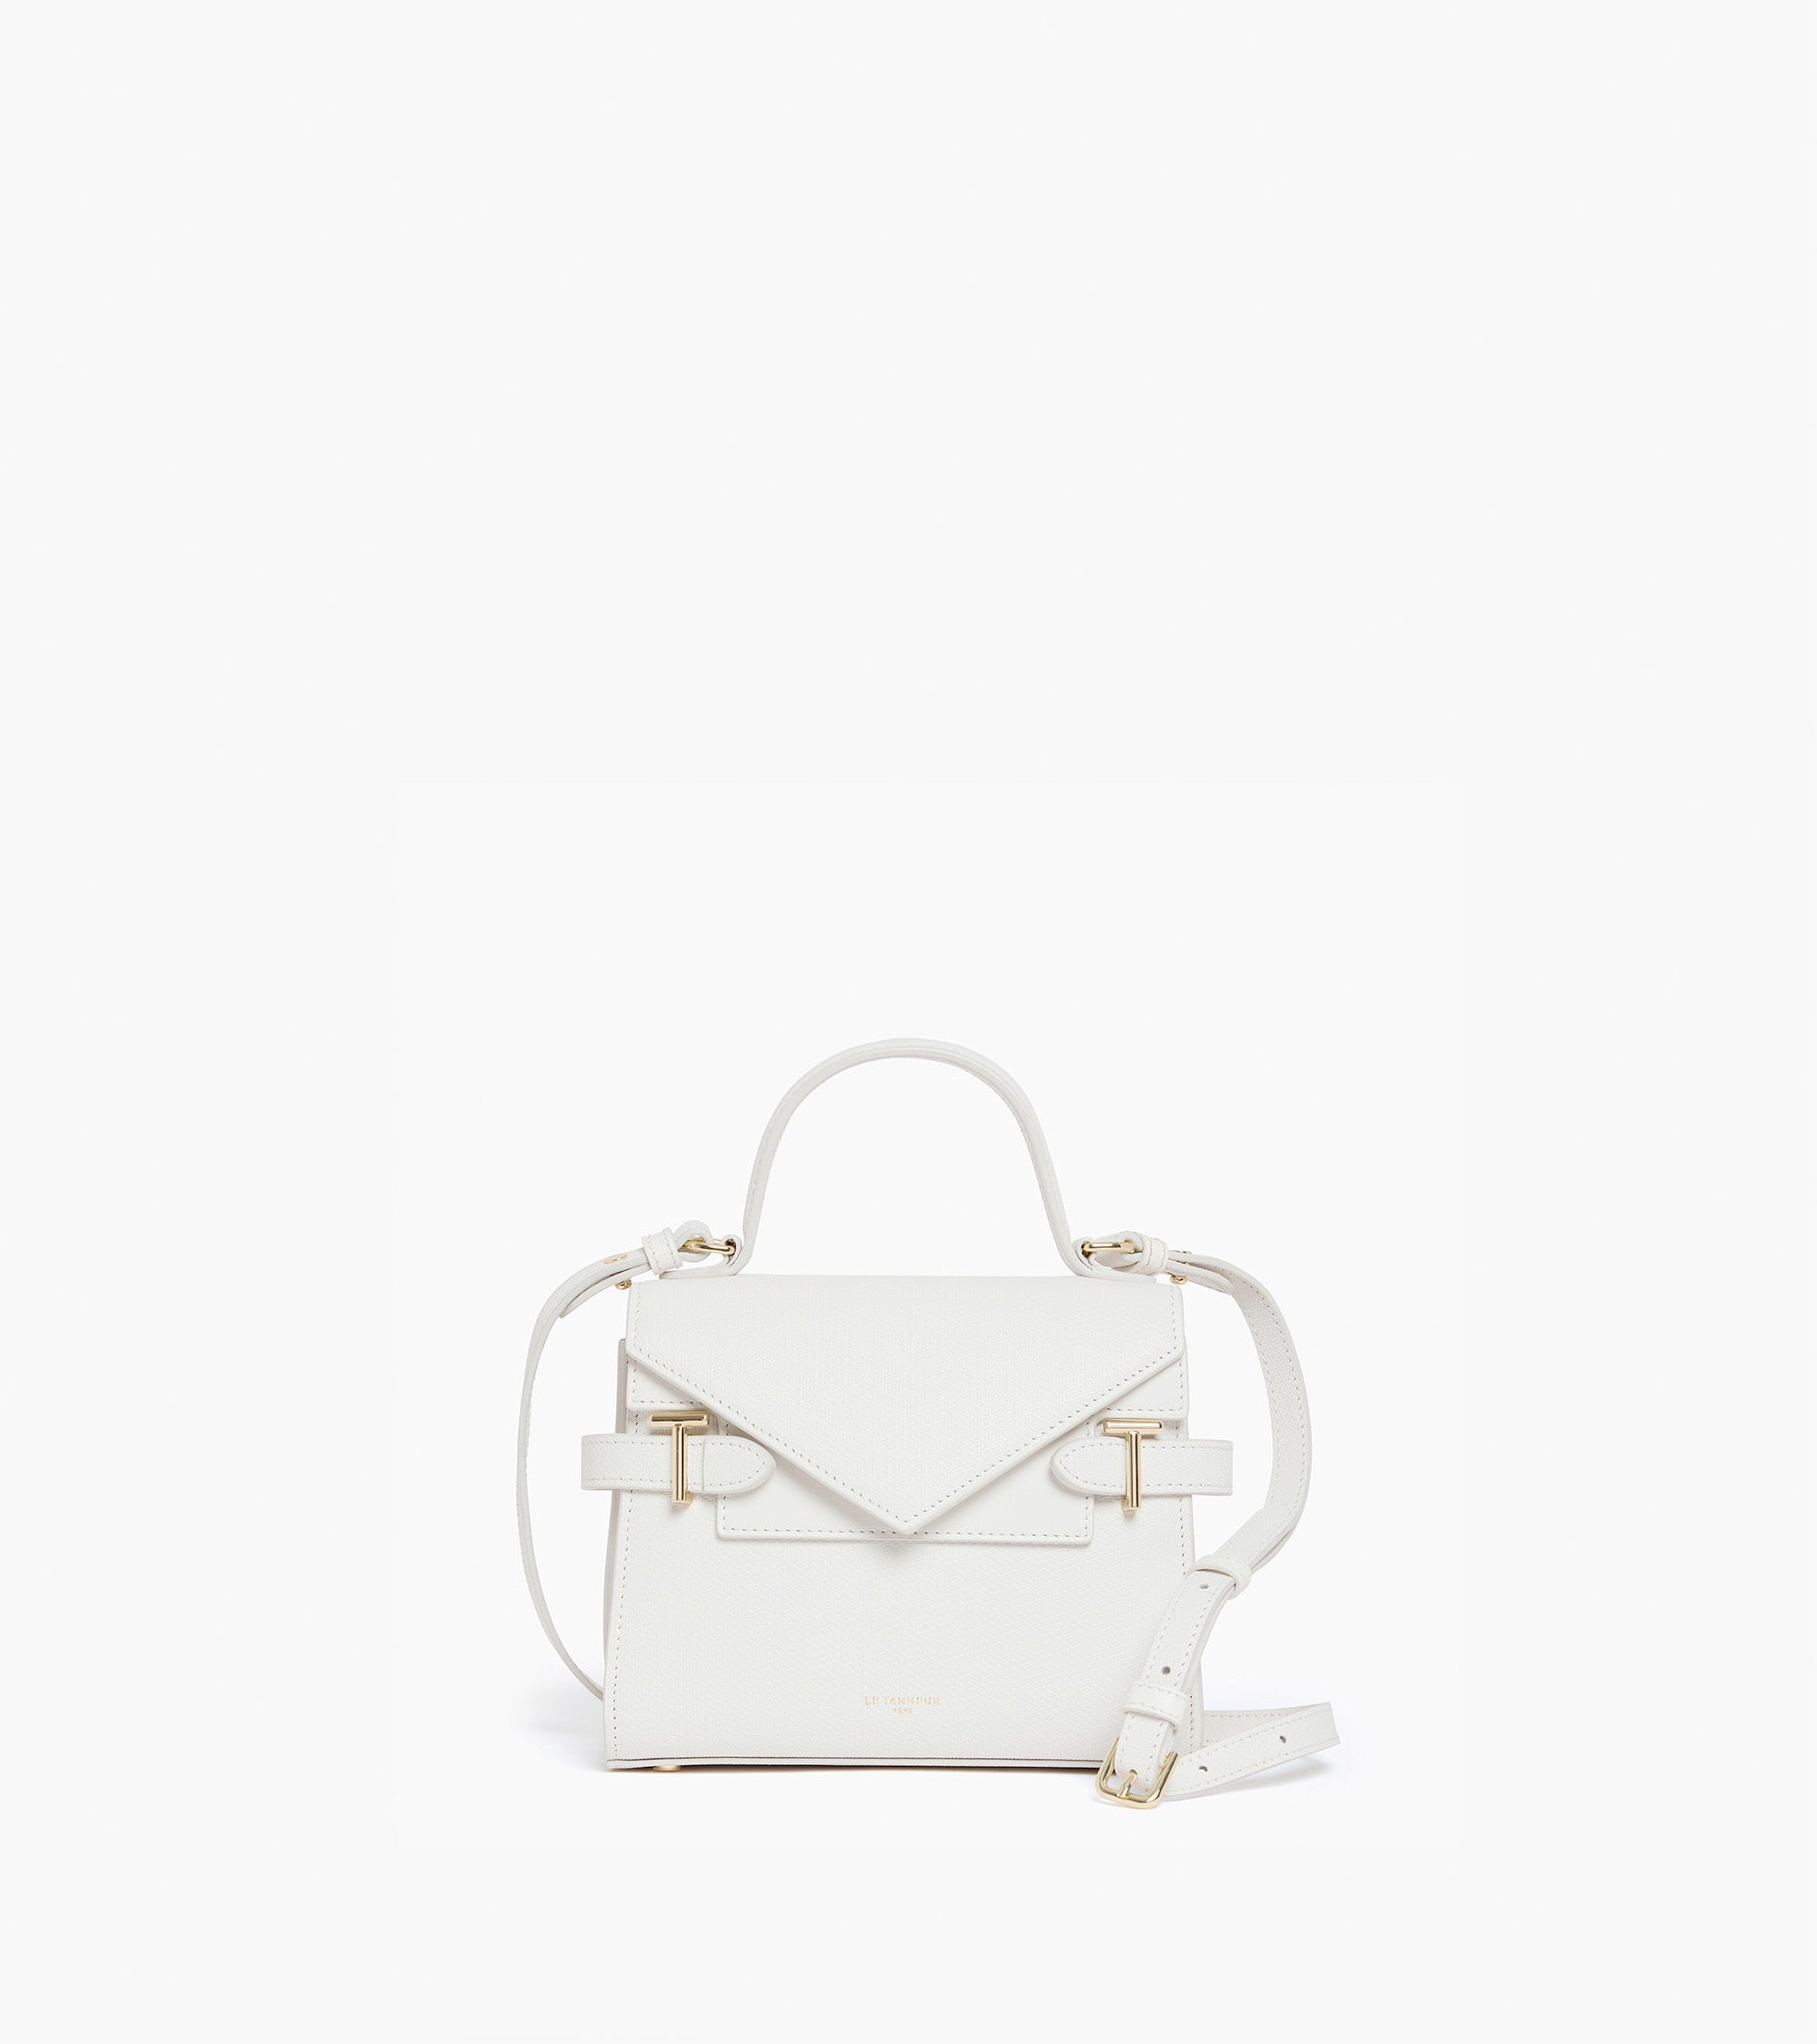 Emilie small double flap handbag in signature T leather